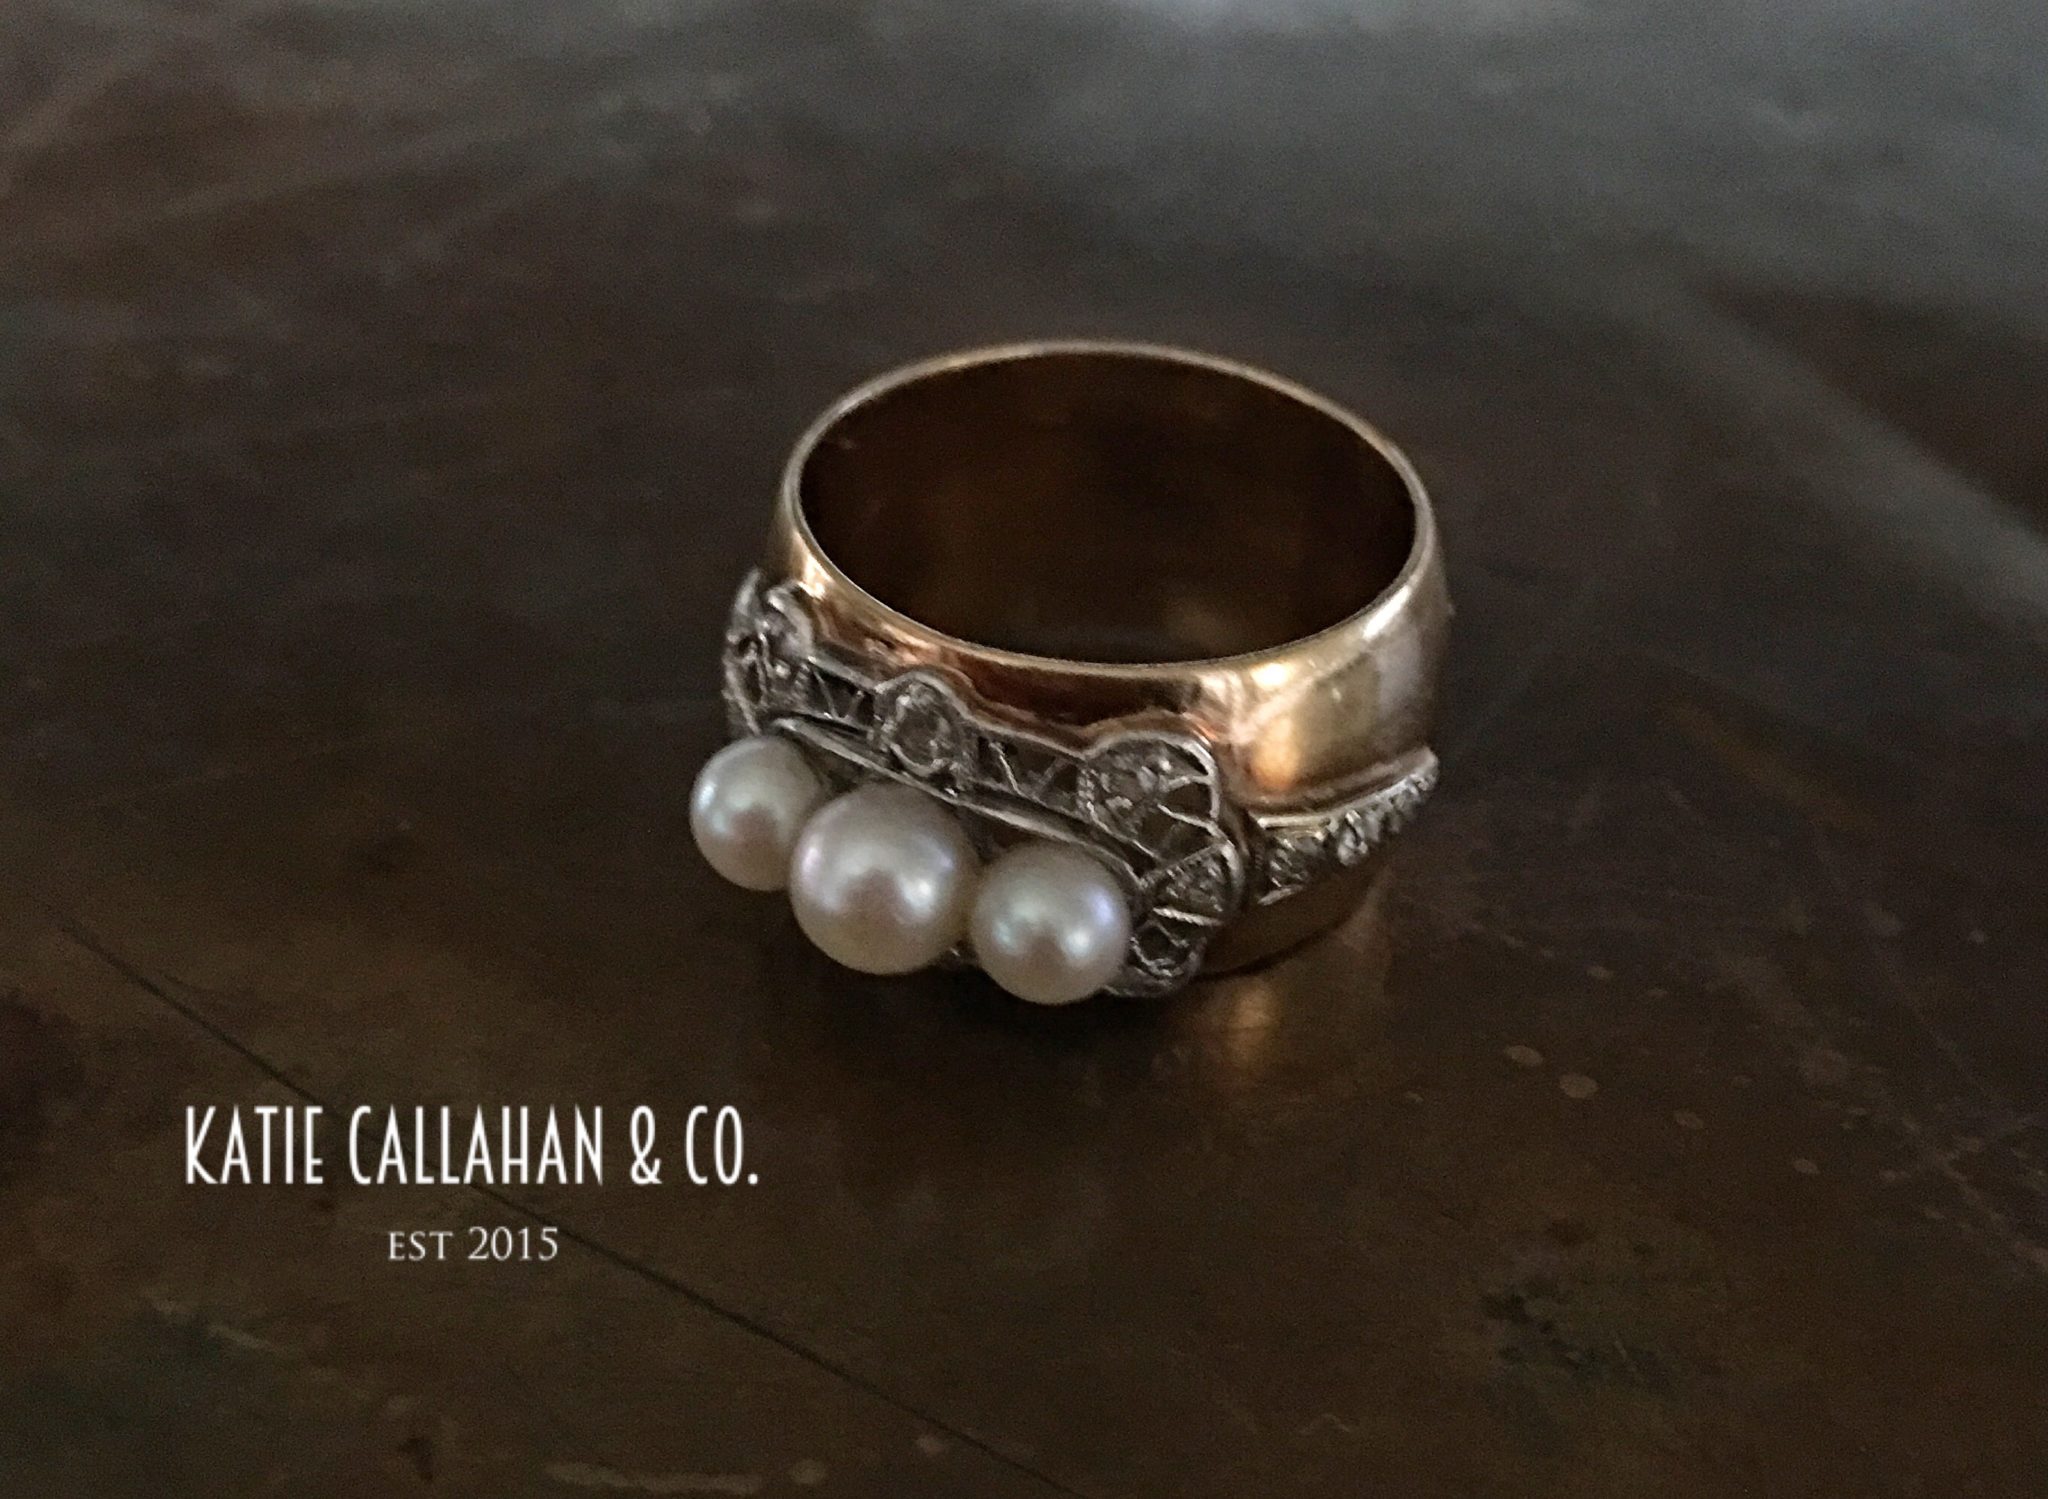 Edwardian Mine Cut Diamond and Cultured Pearl 14kt Yellow Gold and Platinum Topped Ring (Antique)